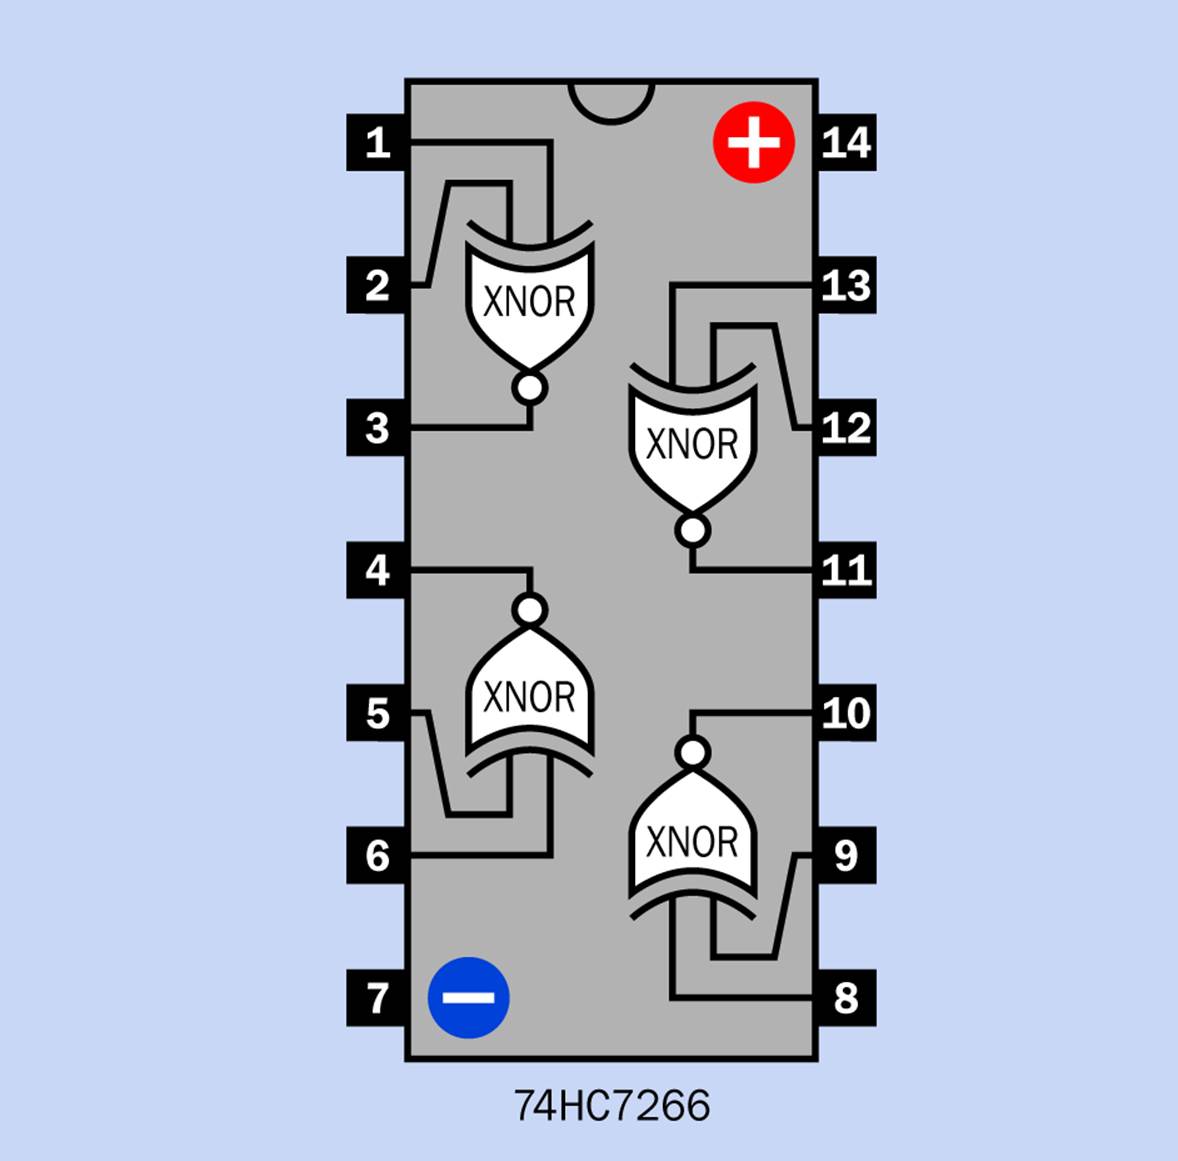 Pinouts of a quad two-input XNOR chip. The internal connections of this chip are different from those of all other chips containing logic gates.